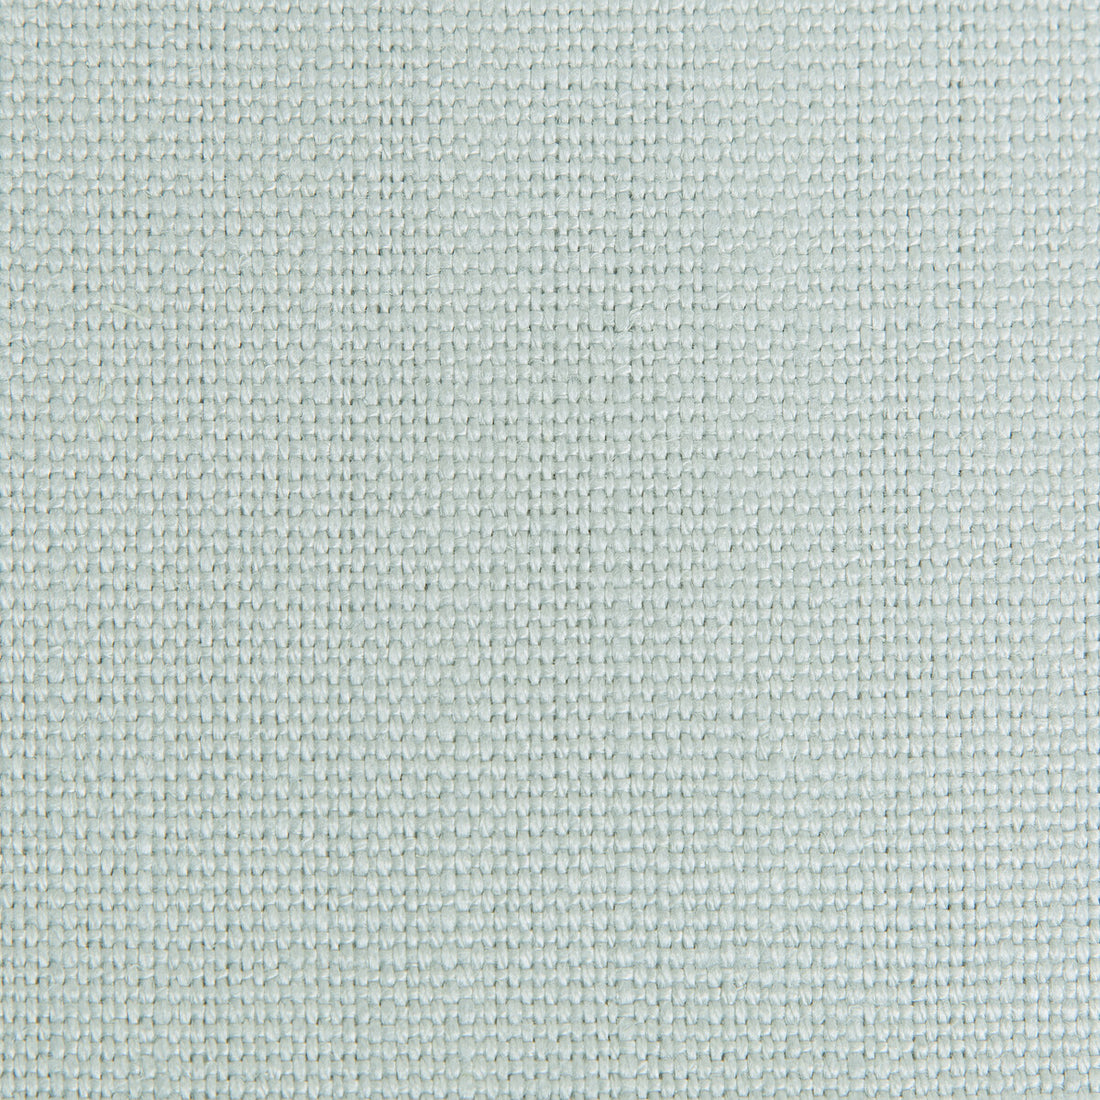 Stone Harbor fabric in sky color - pattern 27591.1501.0 - by Kravet Basics in the The Complete Linen IV collection